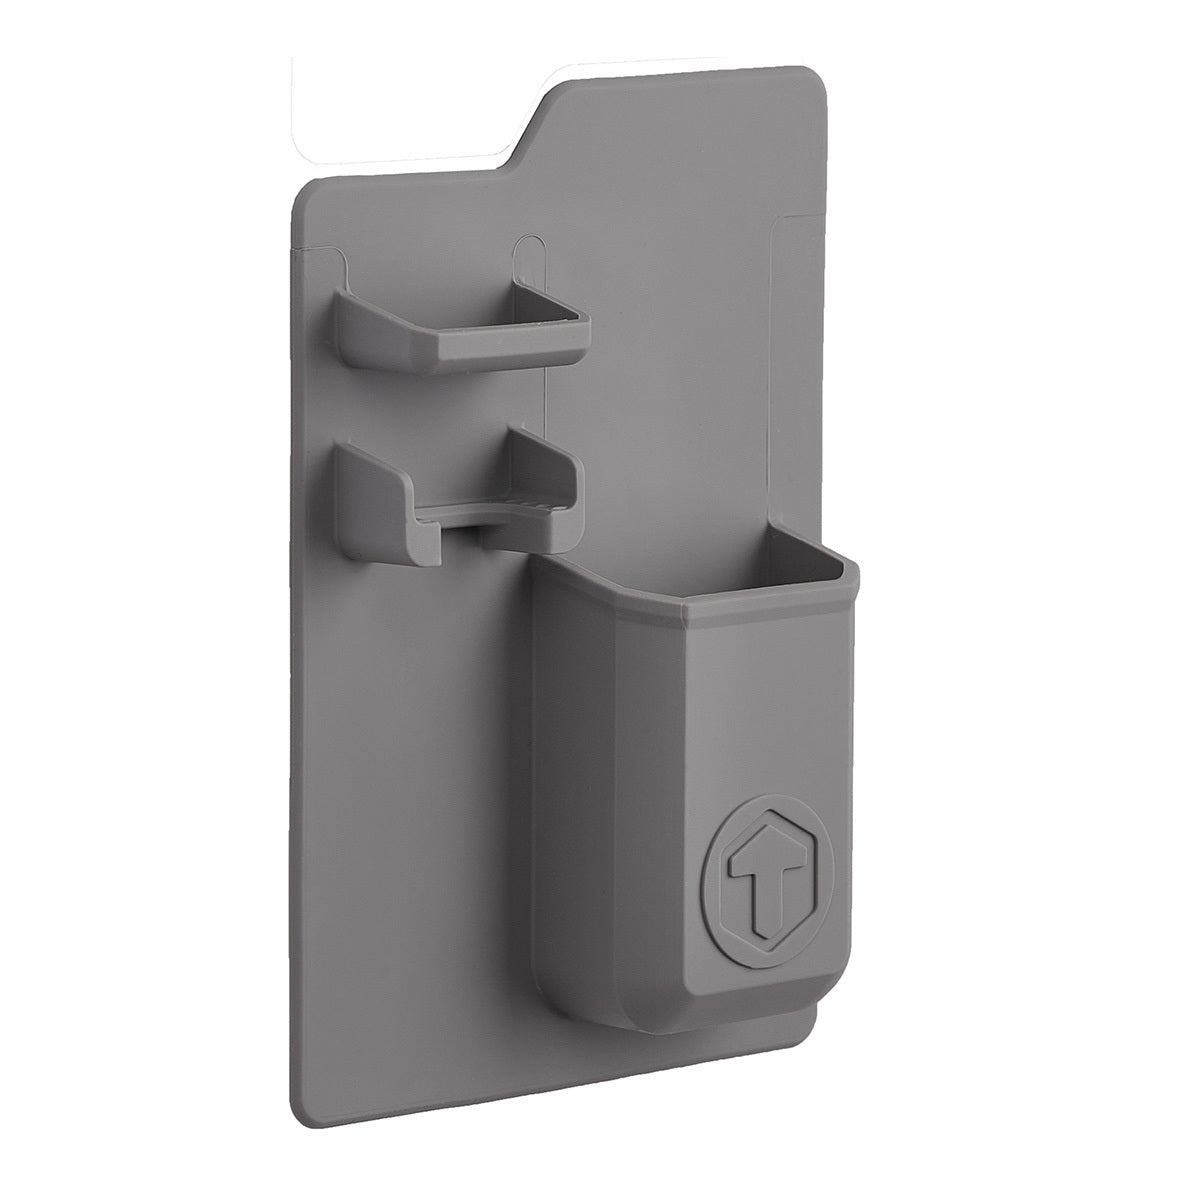 Primary image of Grey Mighty Toothbrush Holder